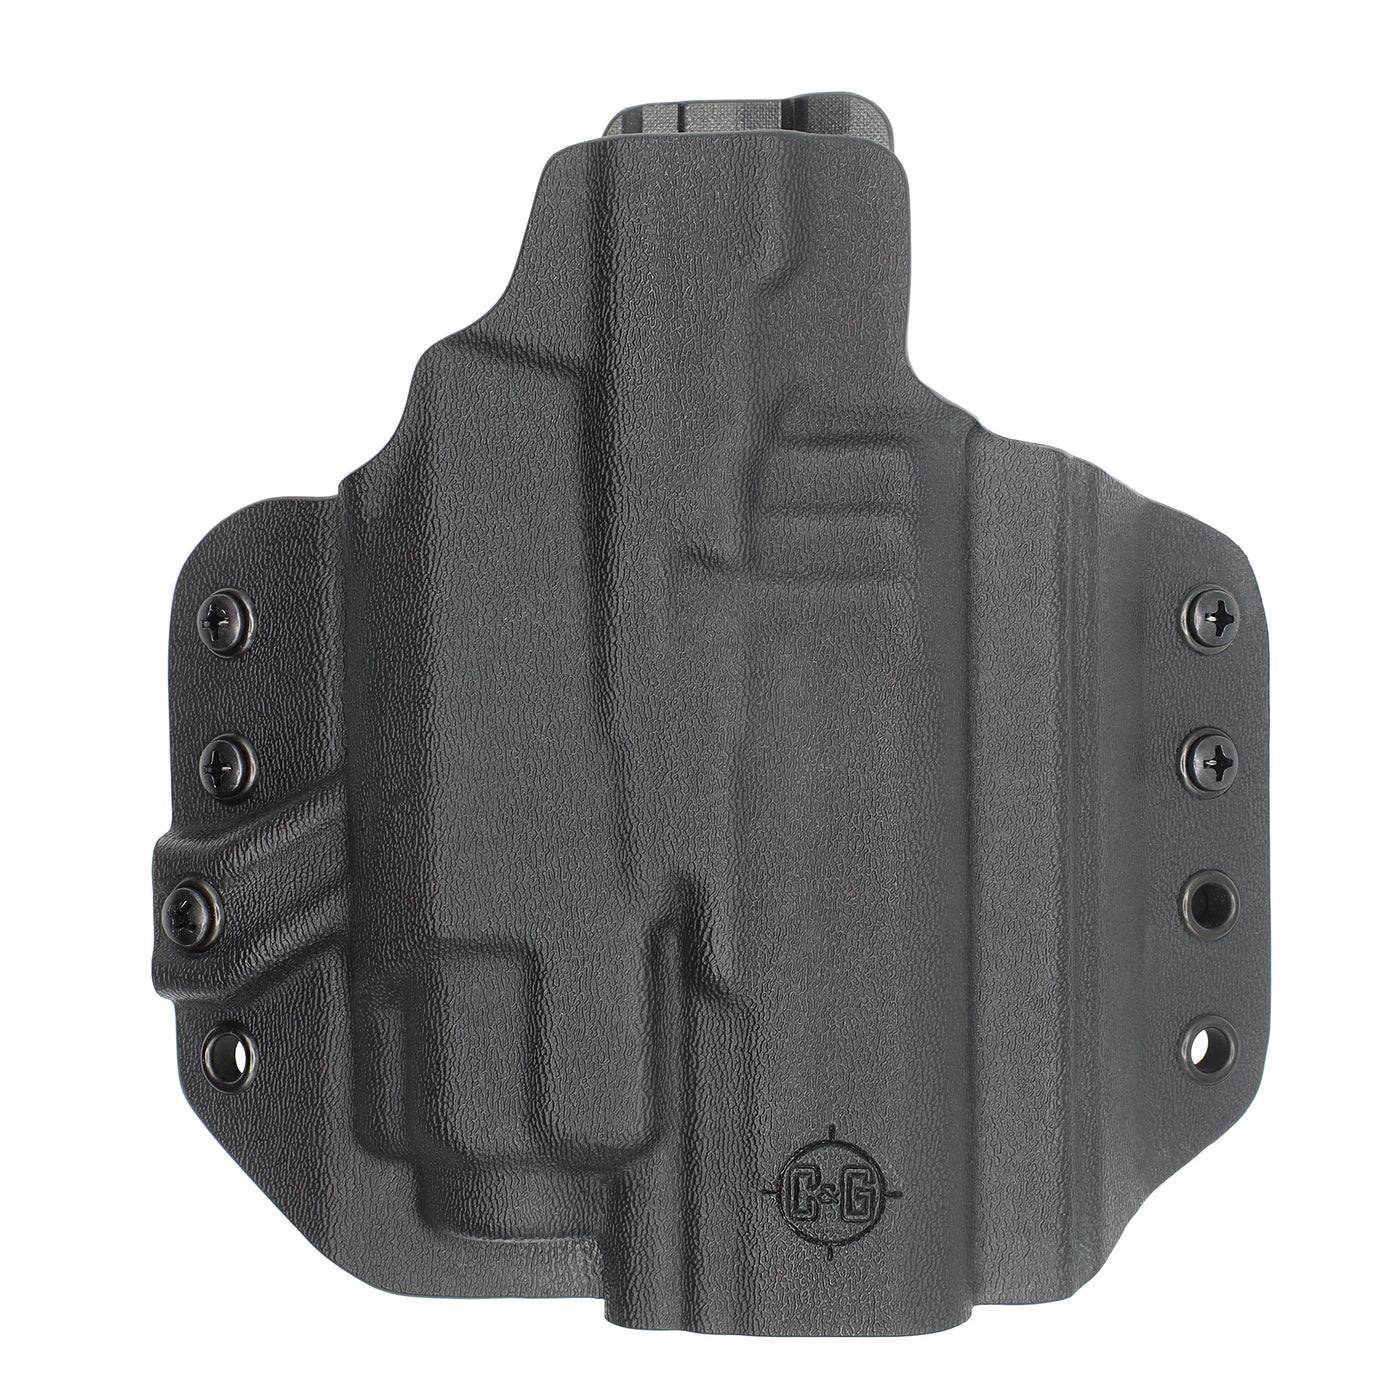 C&G Holsters quickship OWB Tactical CZ P07/P09 Streamlight TLR8